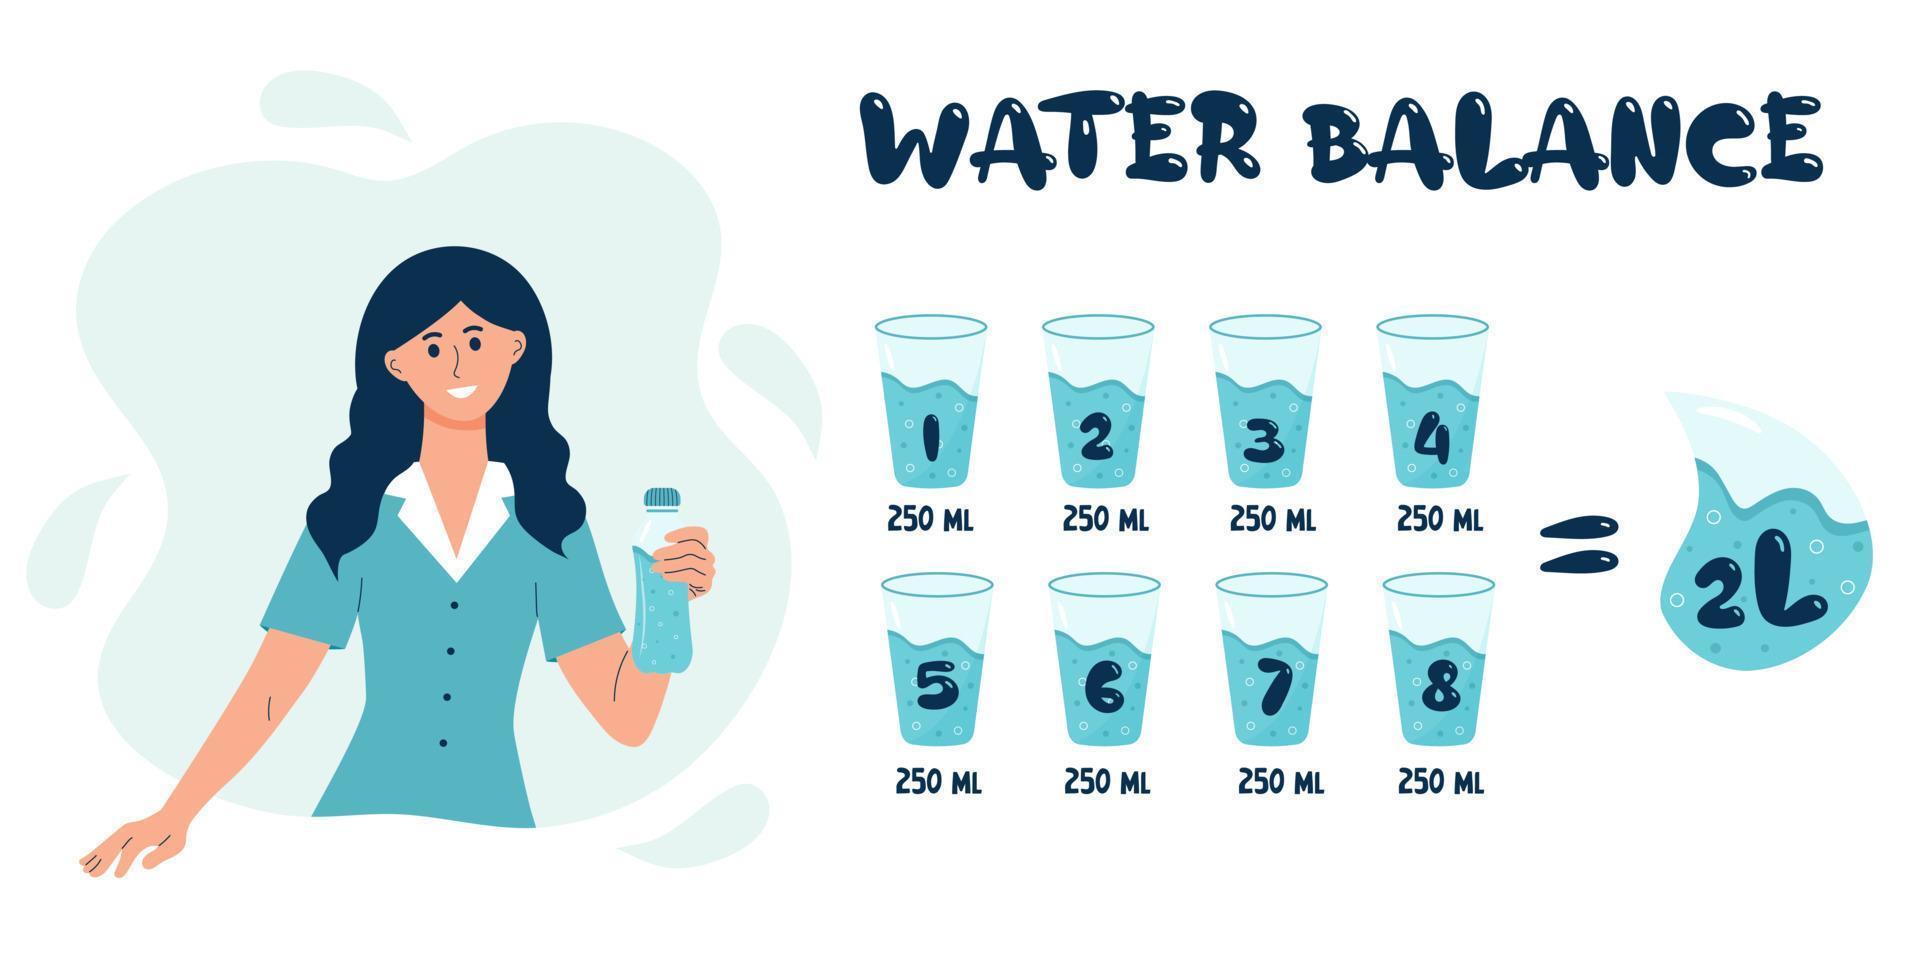 Young woman holding a bottle of water. Water balance tracker with 8 glasses per day rule. vector